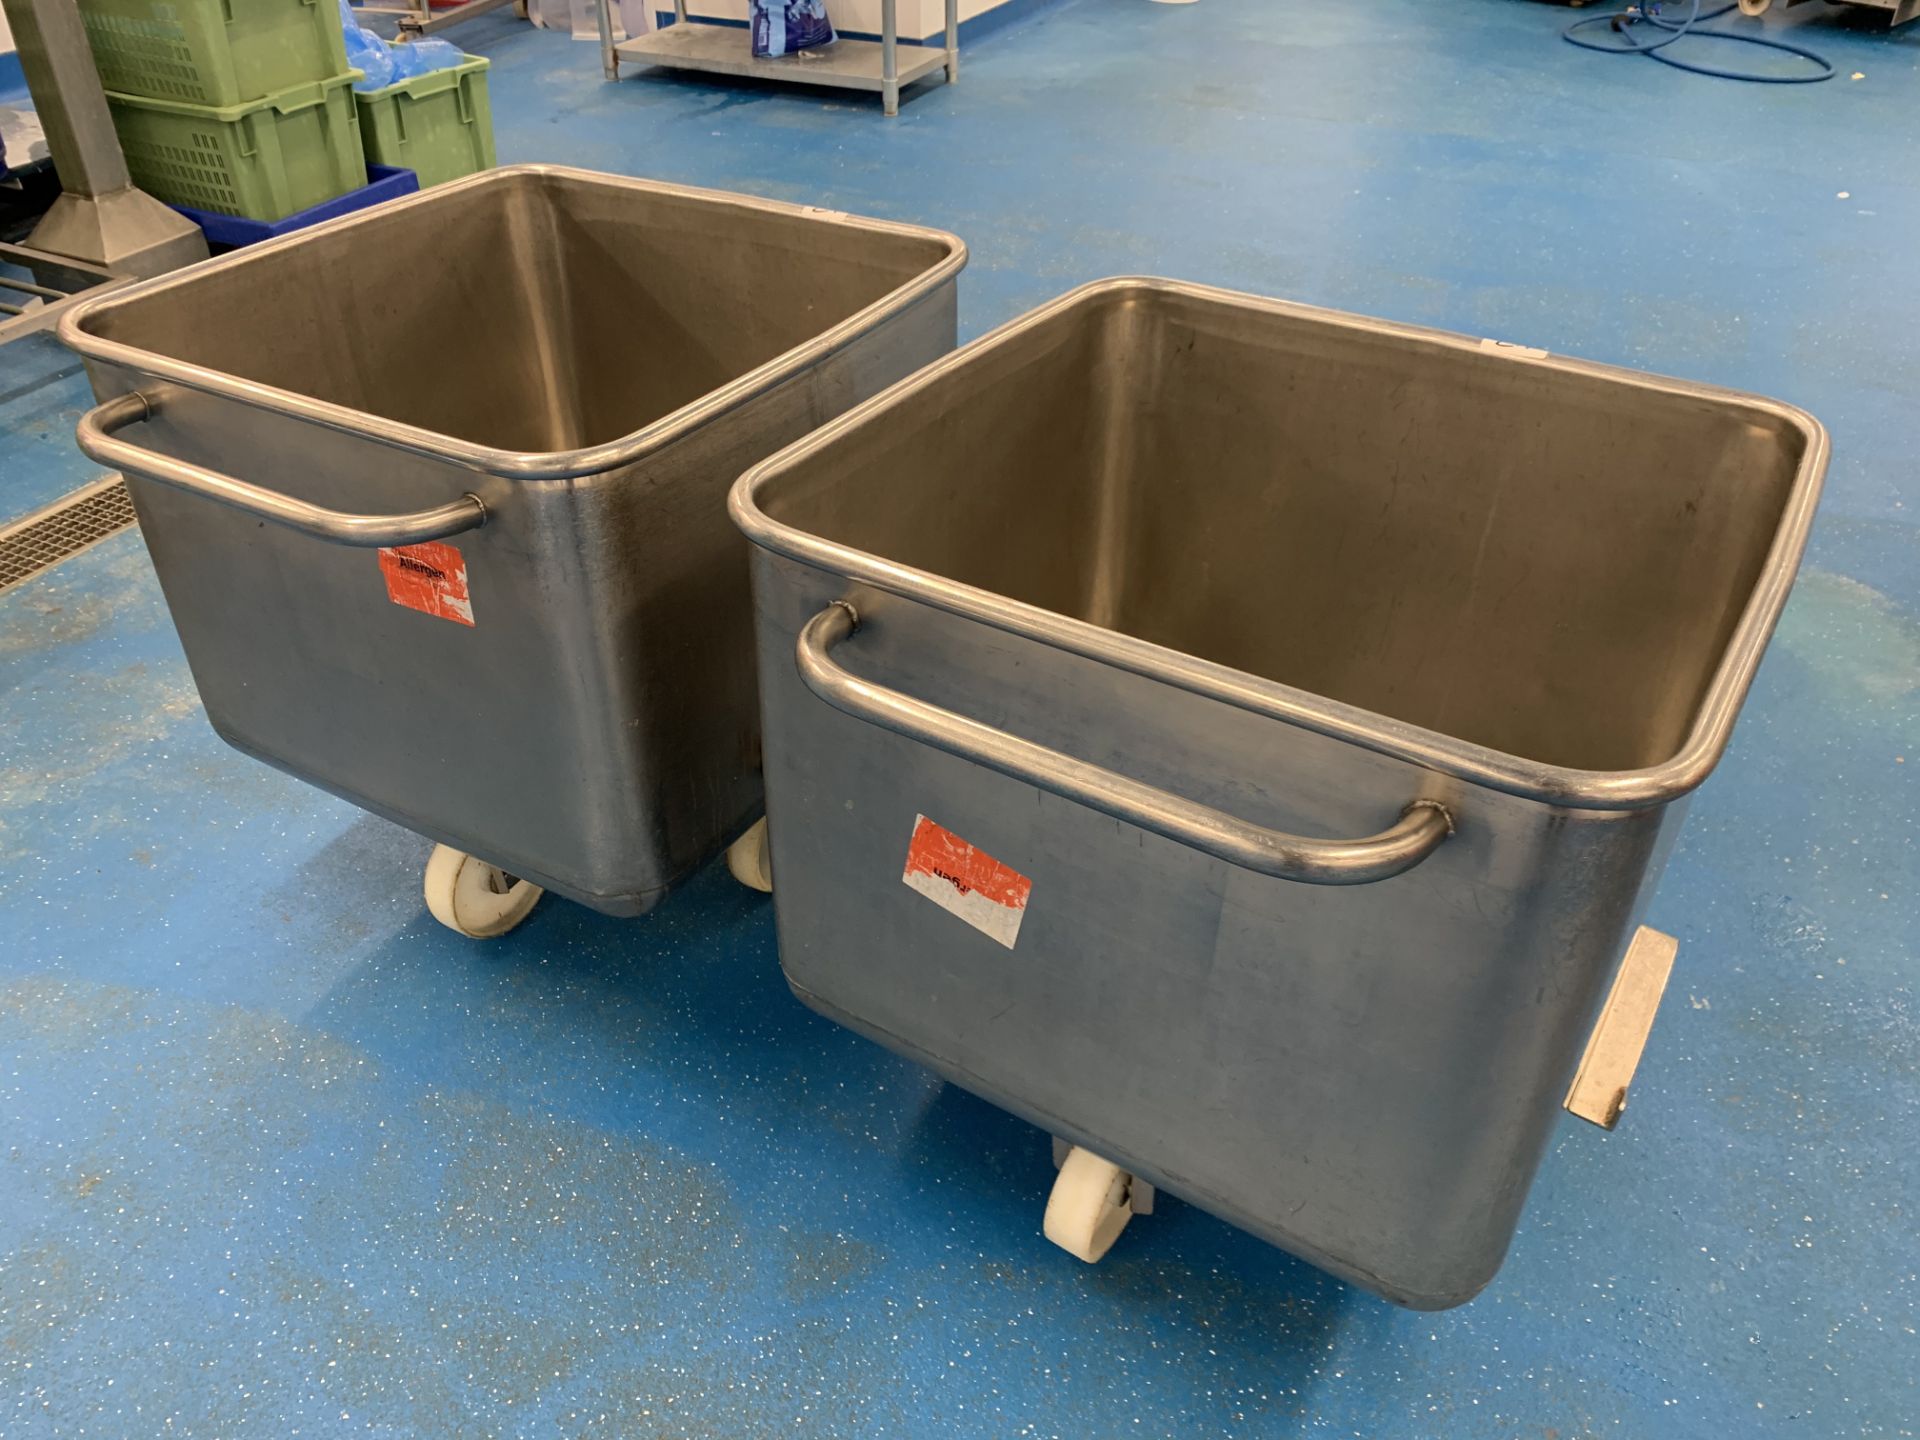 2 x Orbital stainless steel Tote Bins 670 x 670 x 50 mm fitted with drainer pipe - Image 3 of 3